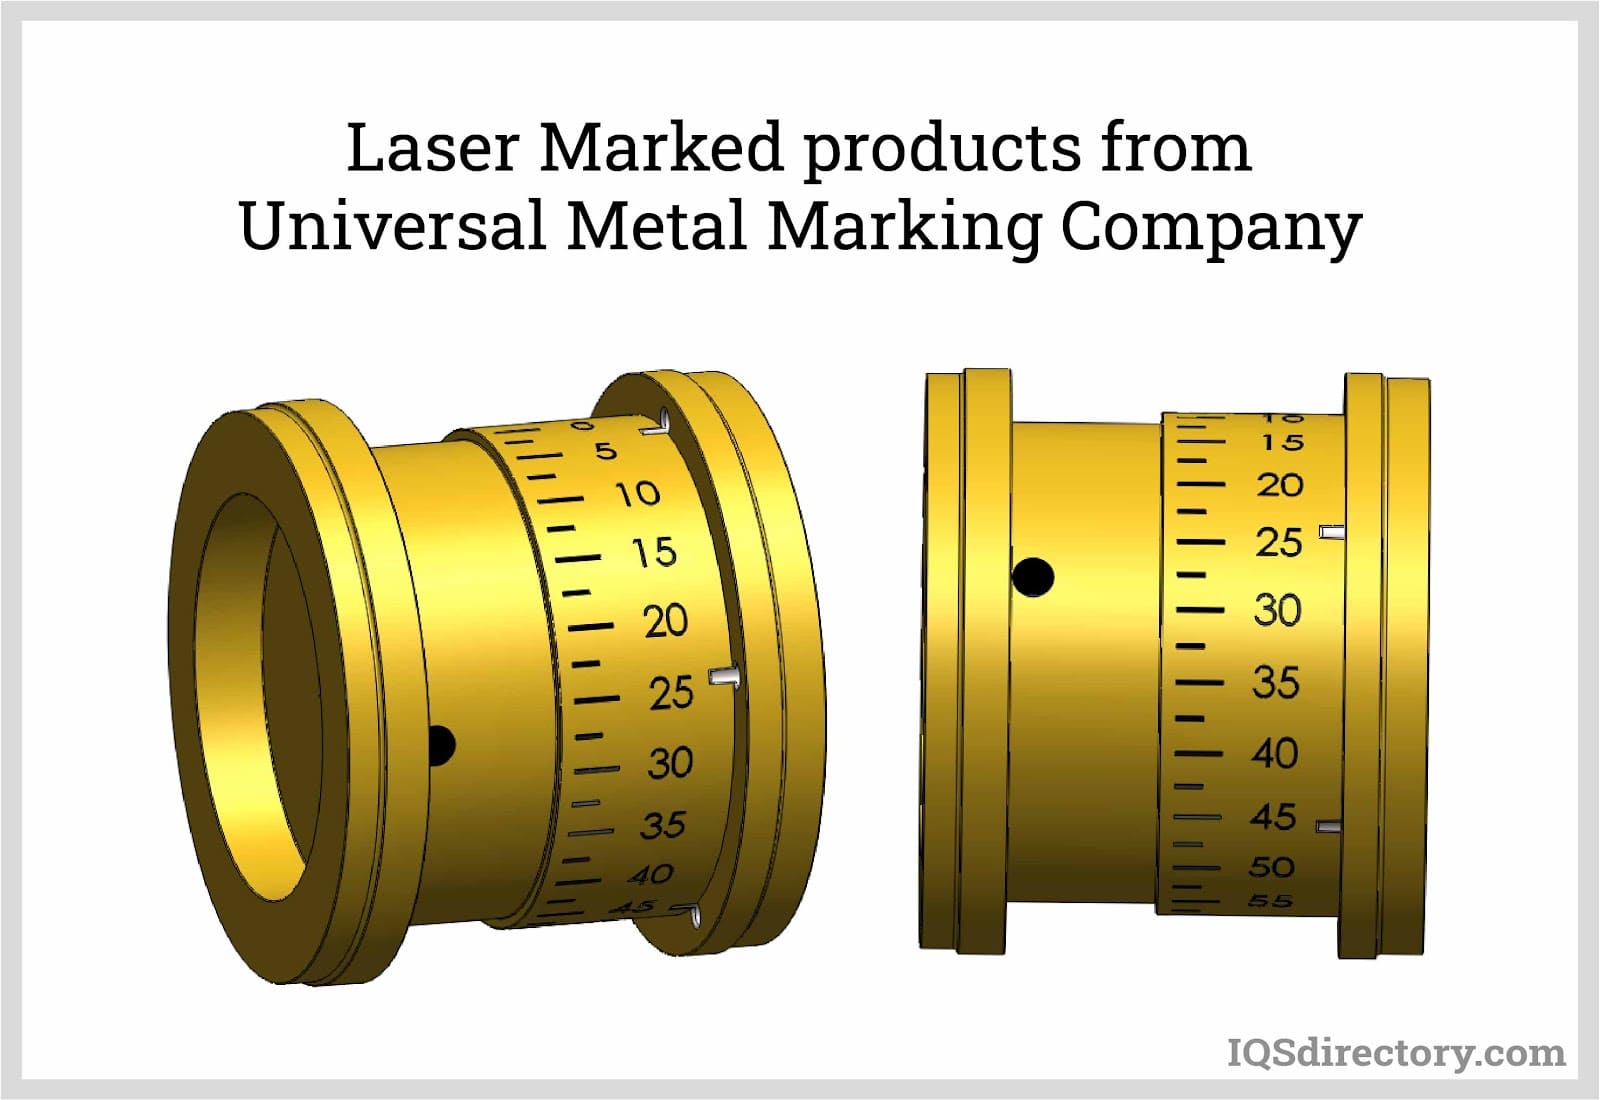 Laser Marked Products from Universal Metal Marking Company